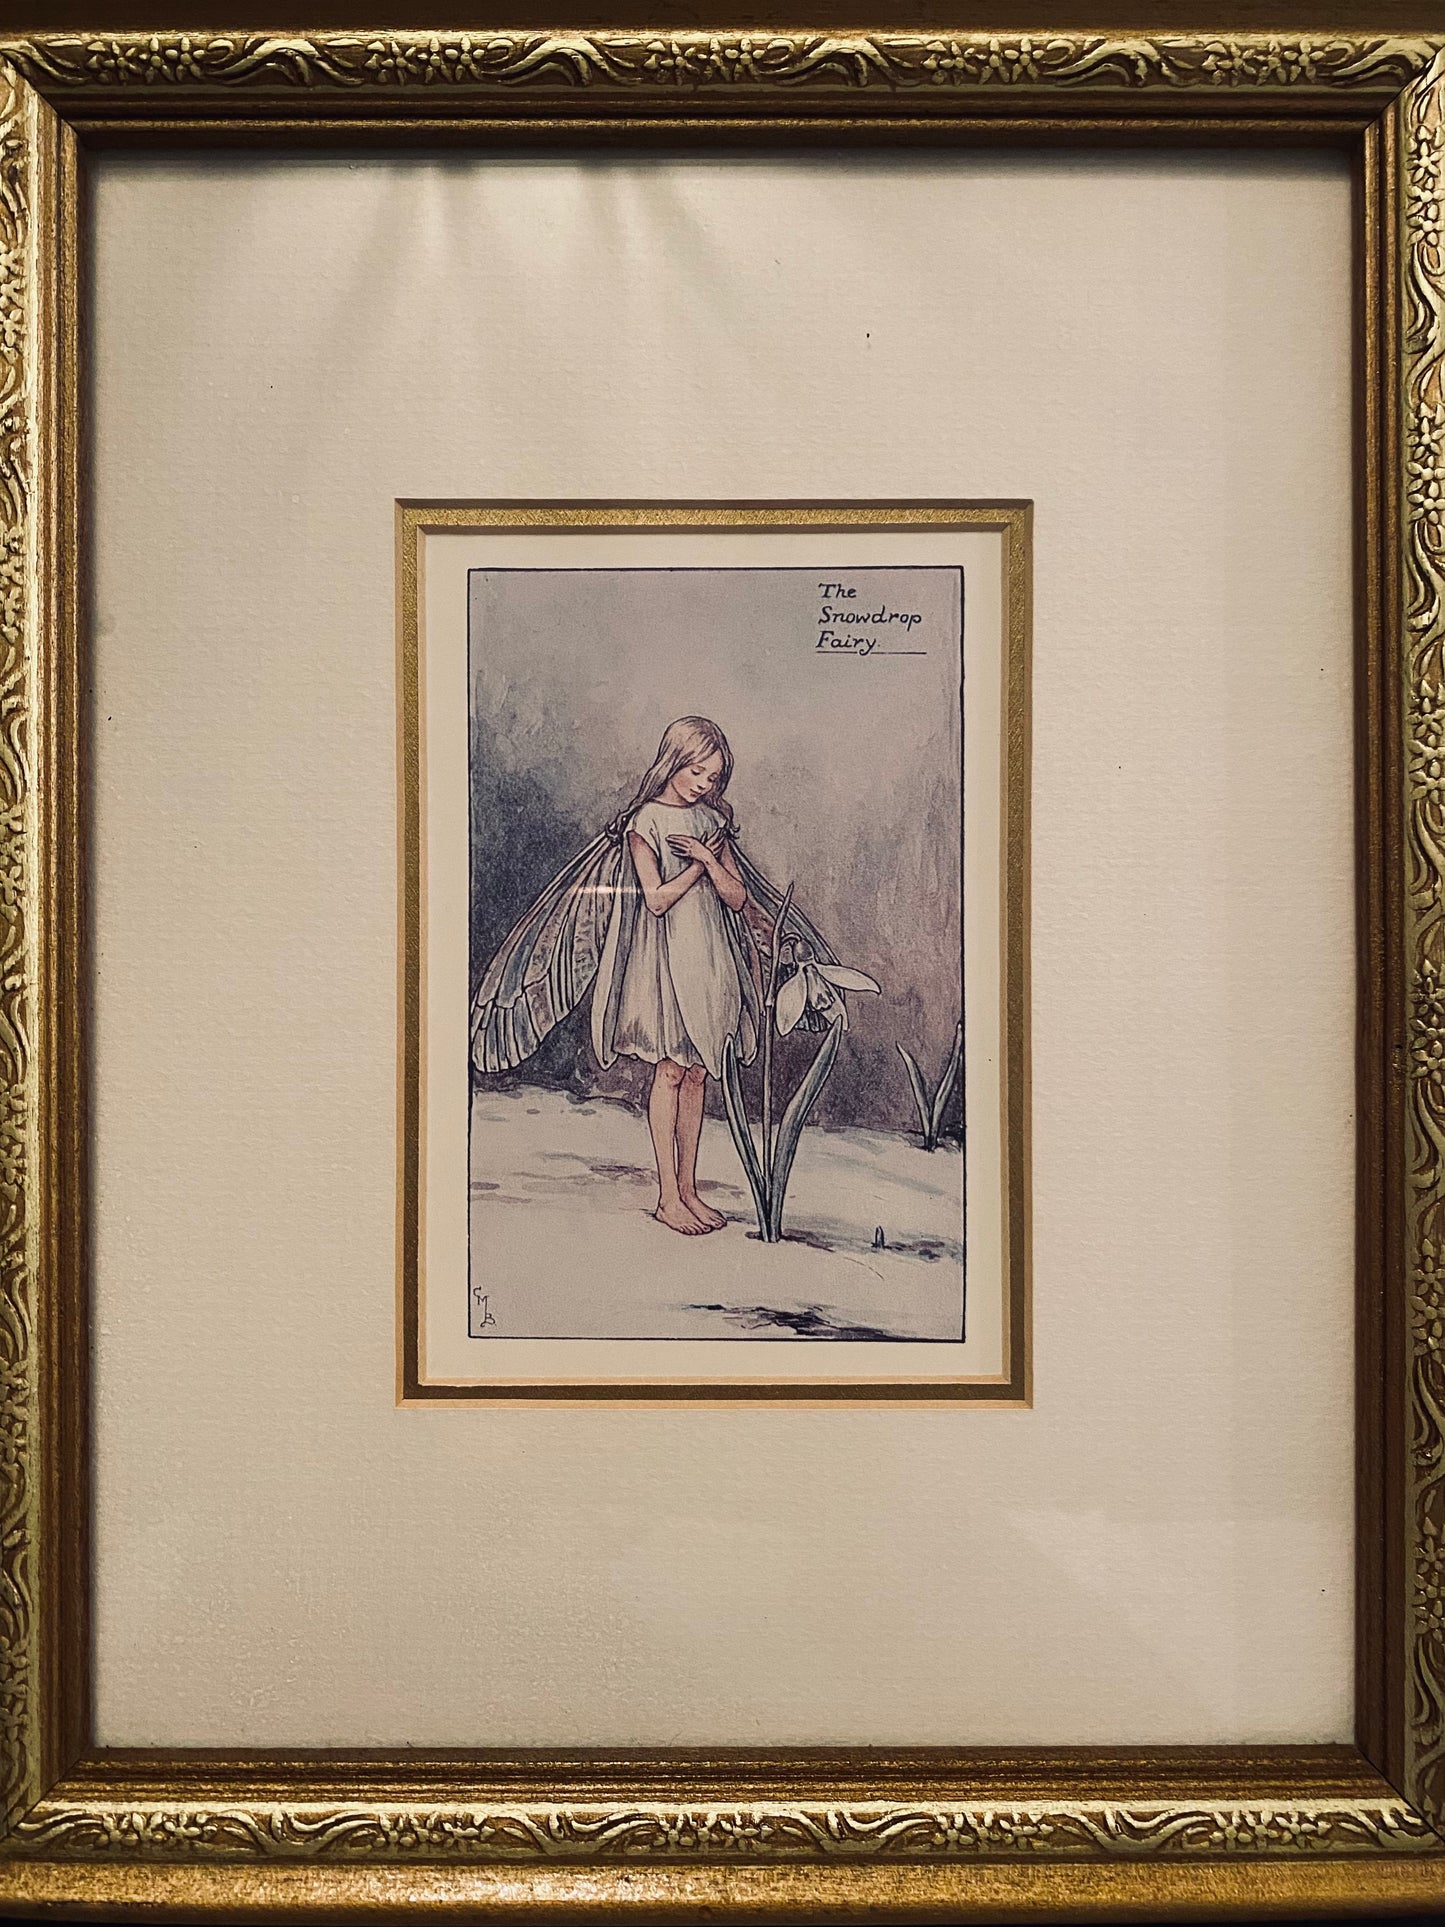 Pair of Gold Framed Fairy Prints, Scarlet Pimpernel and Snowdrop from Cicely Mary Barker’s Flower Fairies